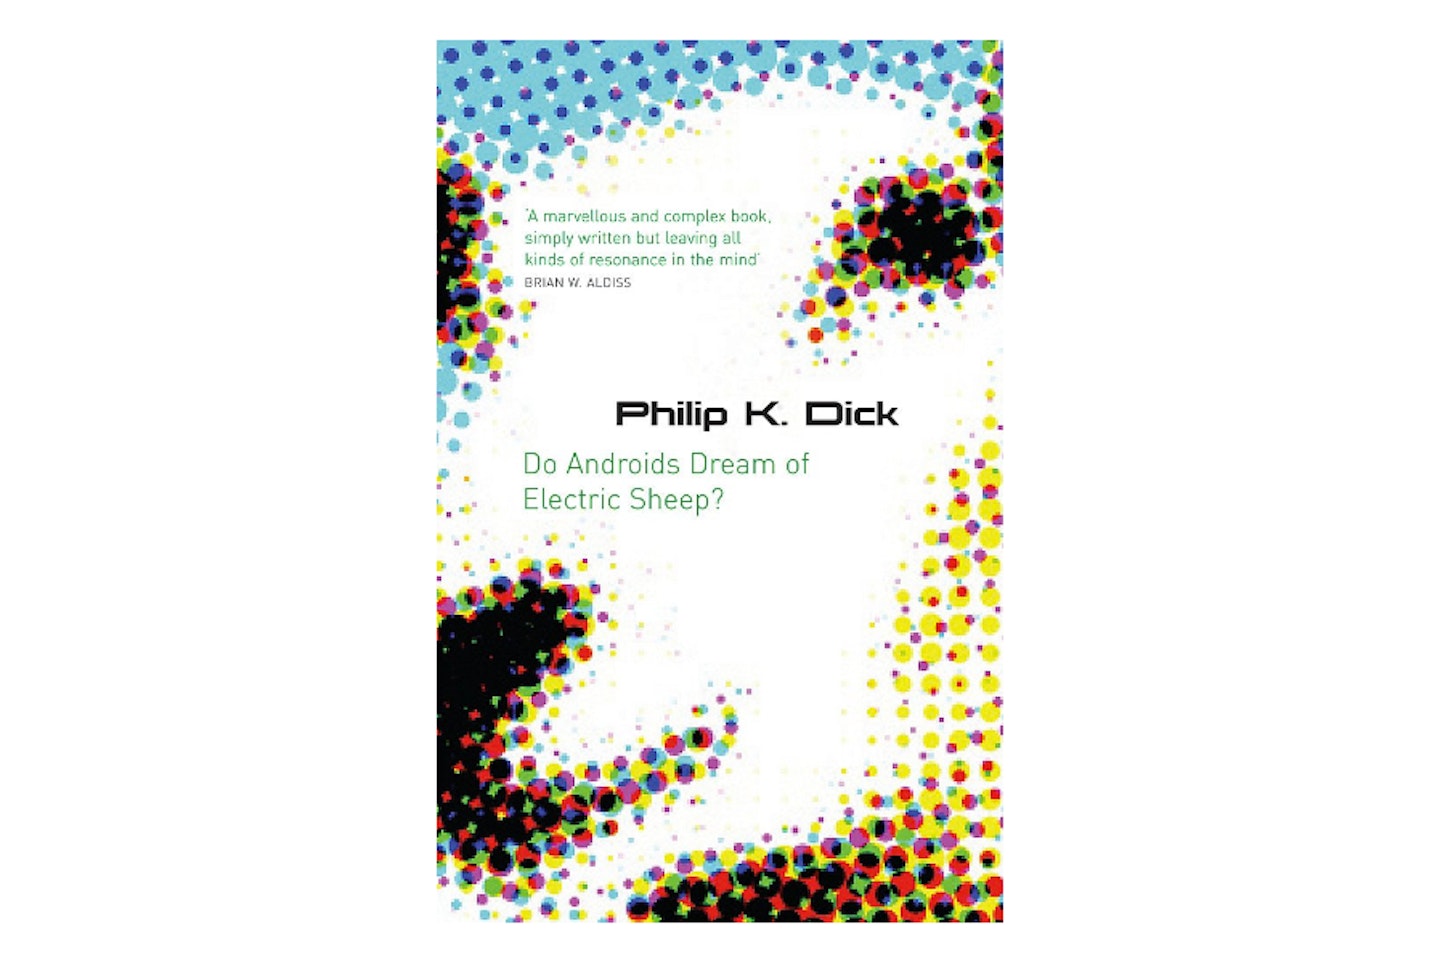 Do Androids Dream Of Electric Sheep? by Philip K. Dick, 1968